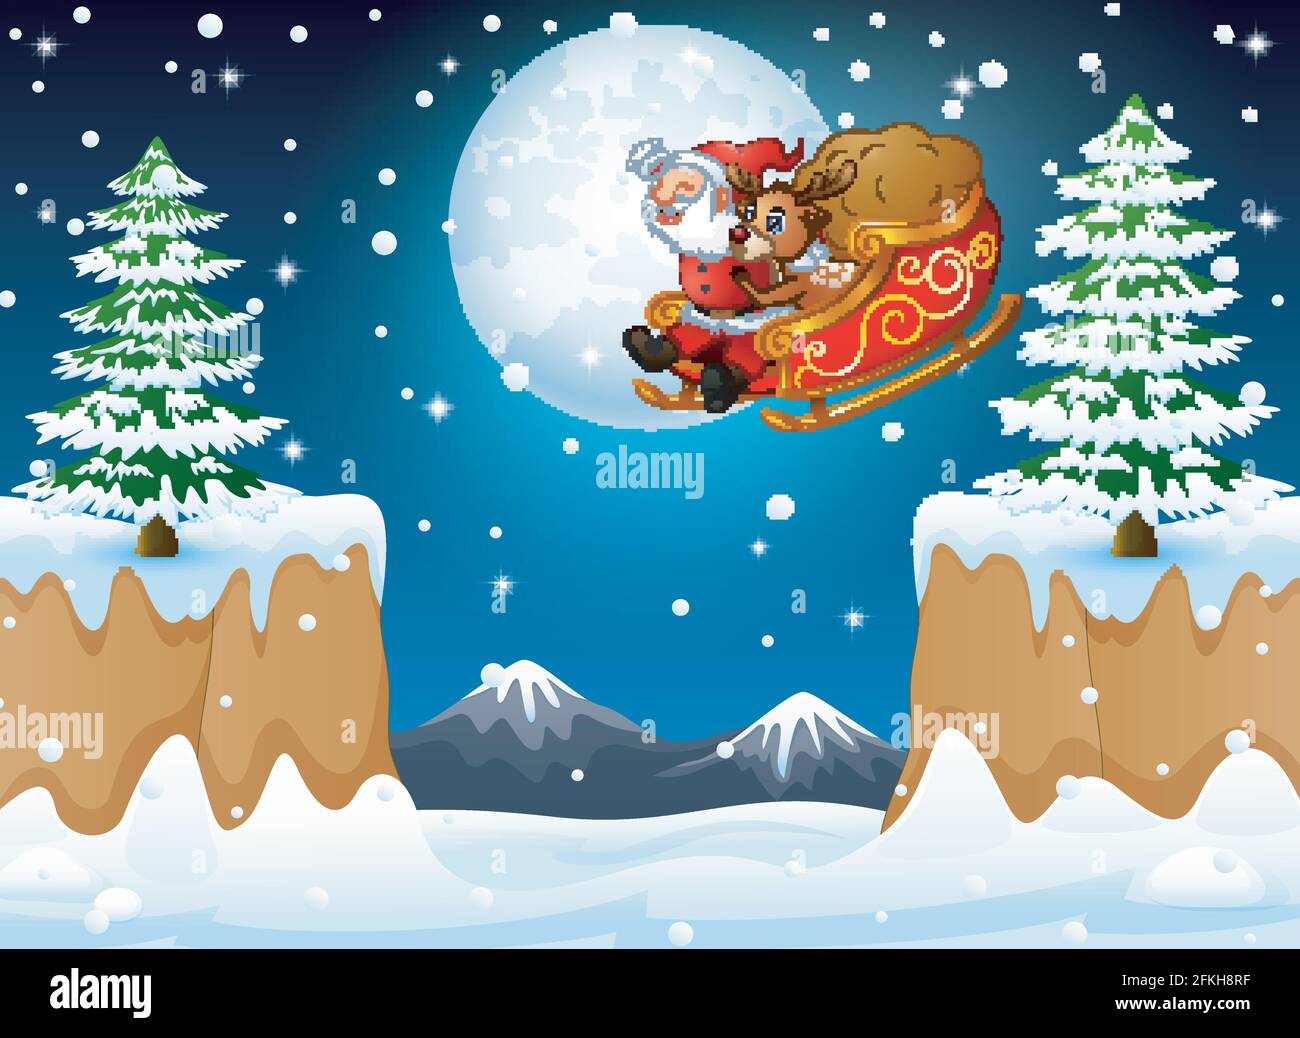 Vector Illustration Of Santa Claus Riding His Sleigh Flying Over